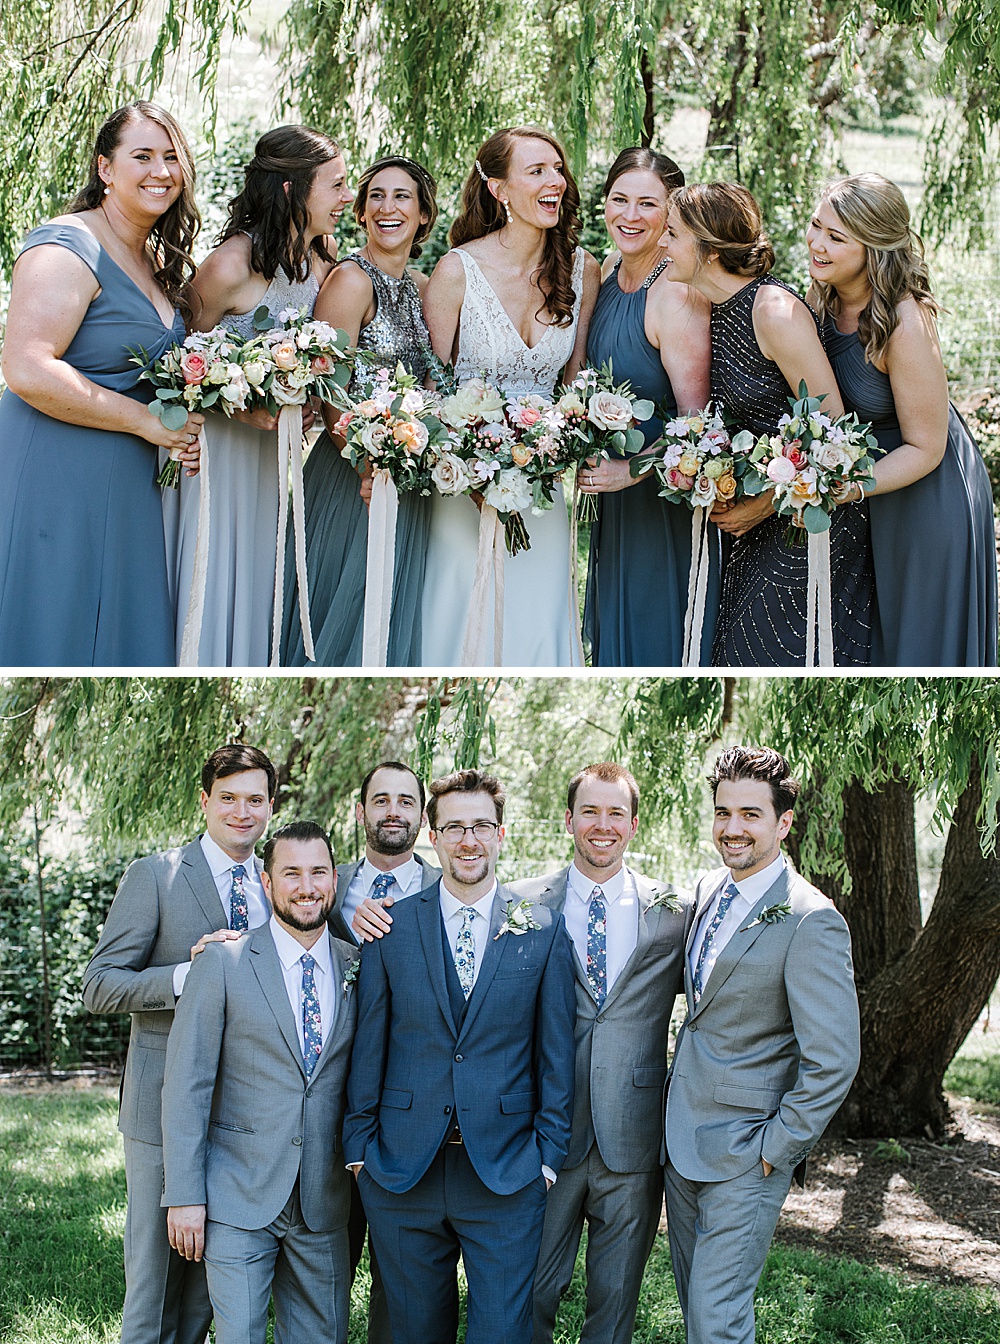 Bridesmaids and groomsmen portrait at Rosewood Events by amy thompson photography